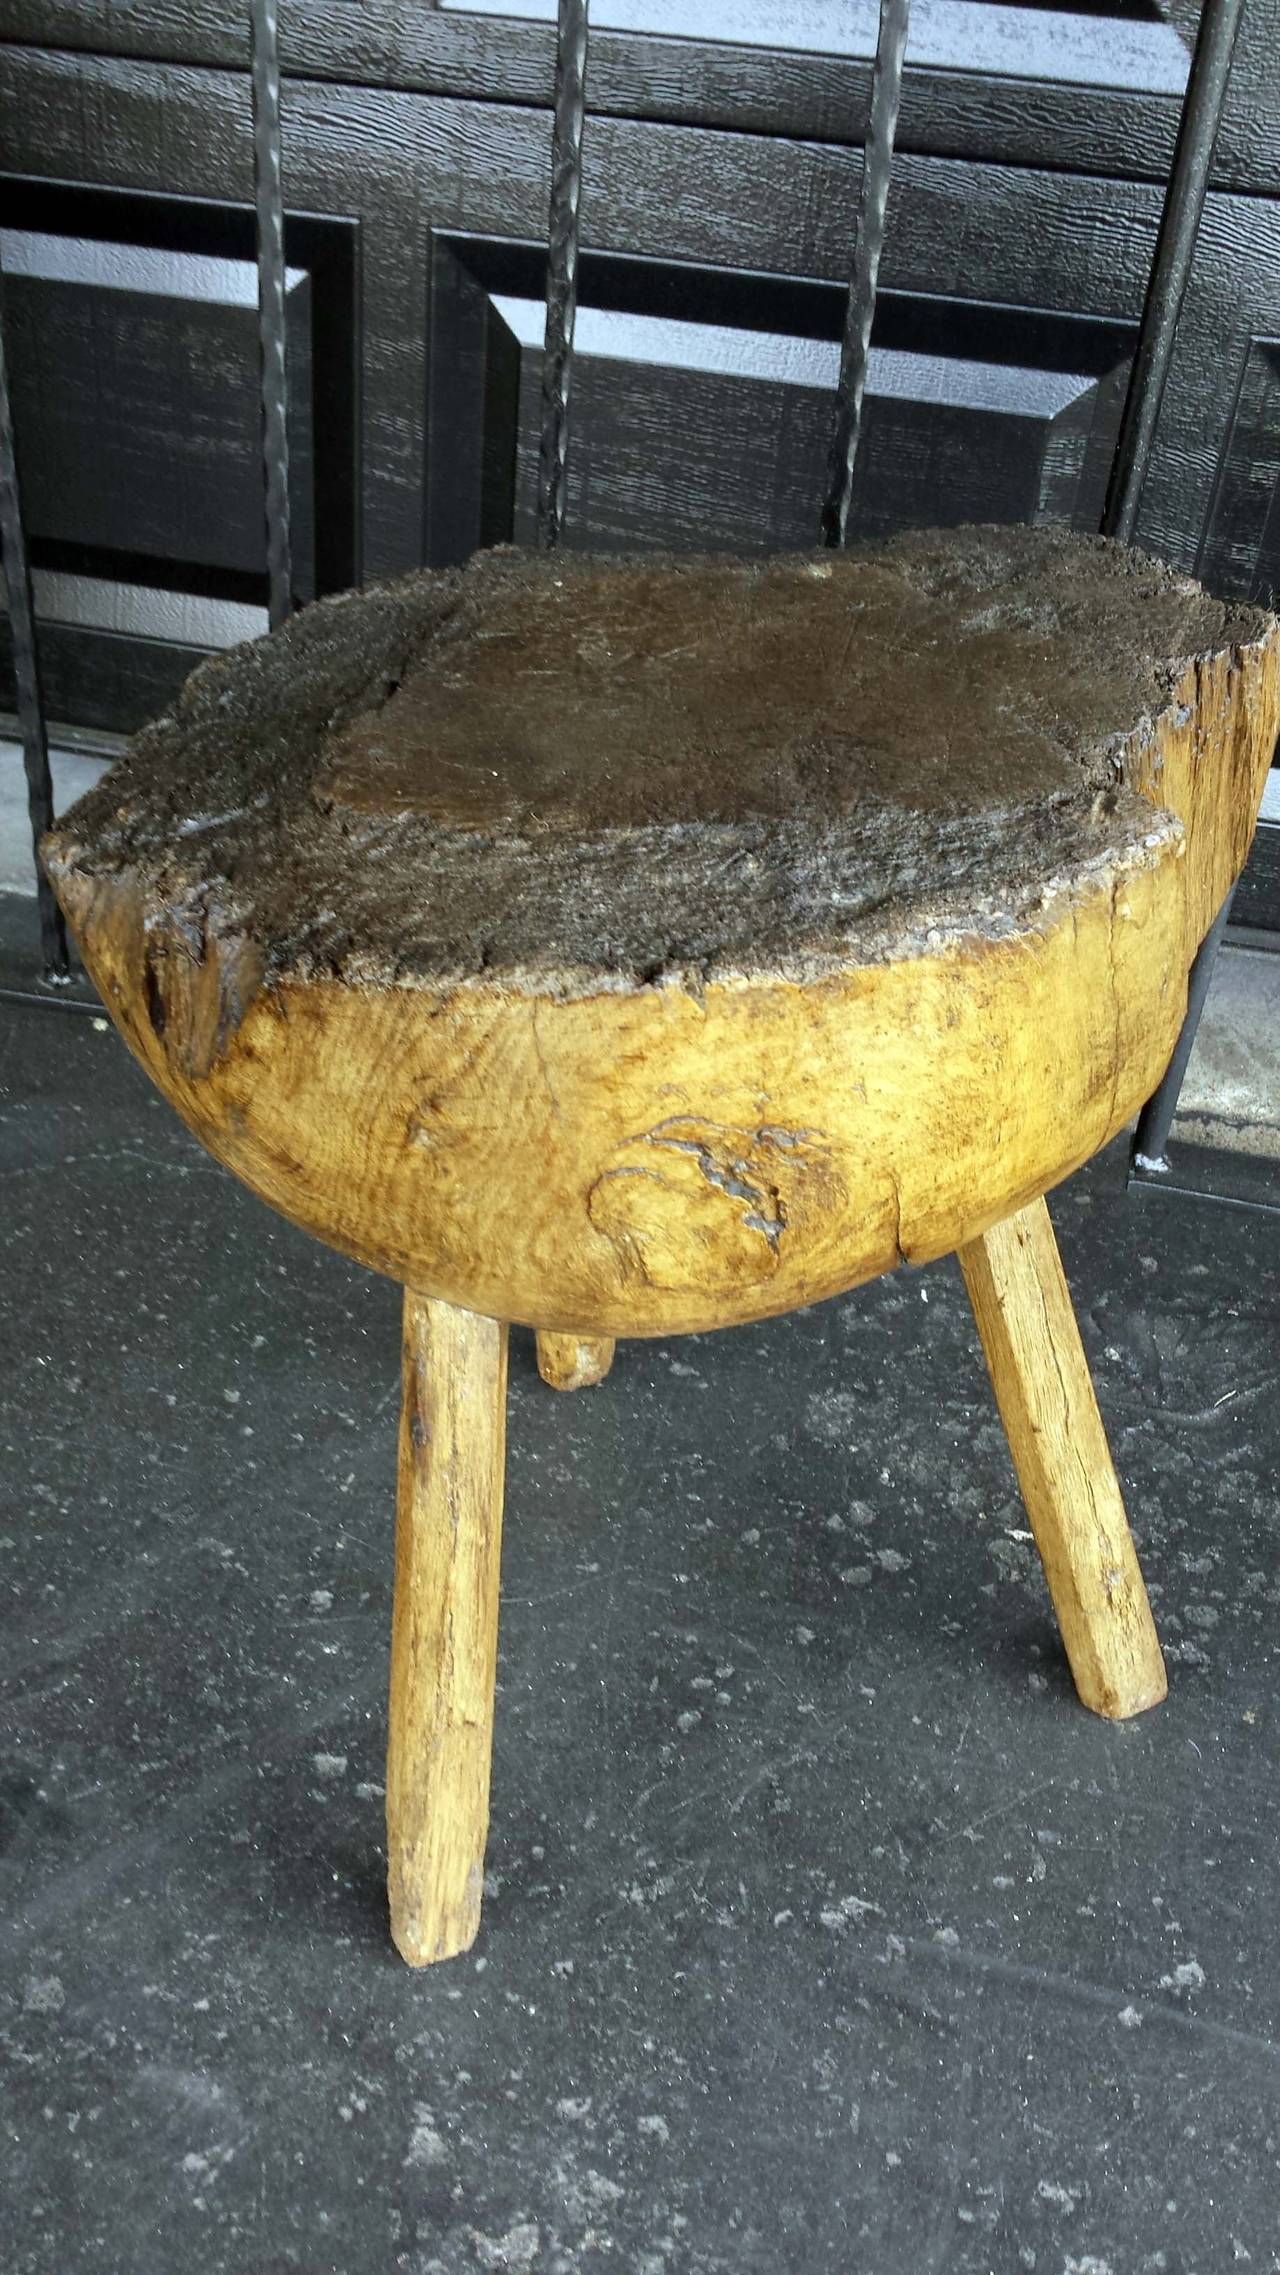 Great Britain (UK) English Primitive Chopping Block Table For Sale